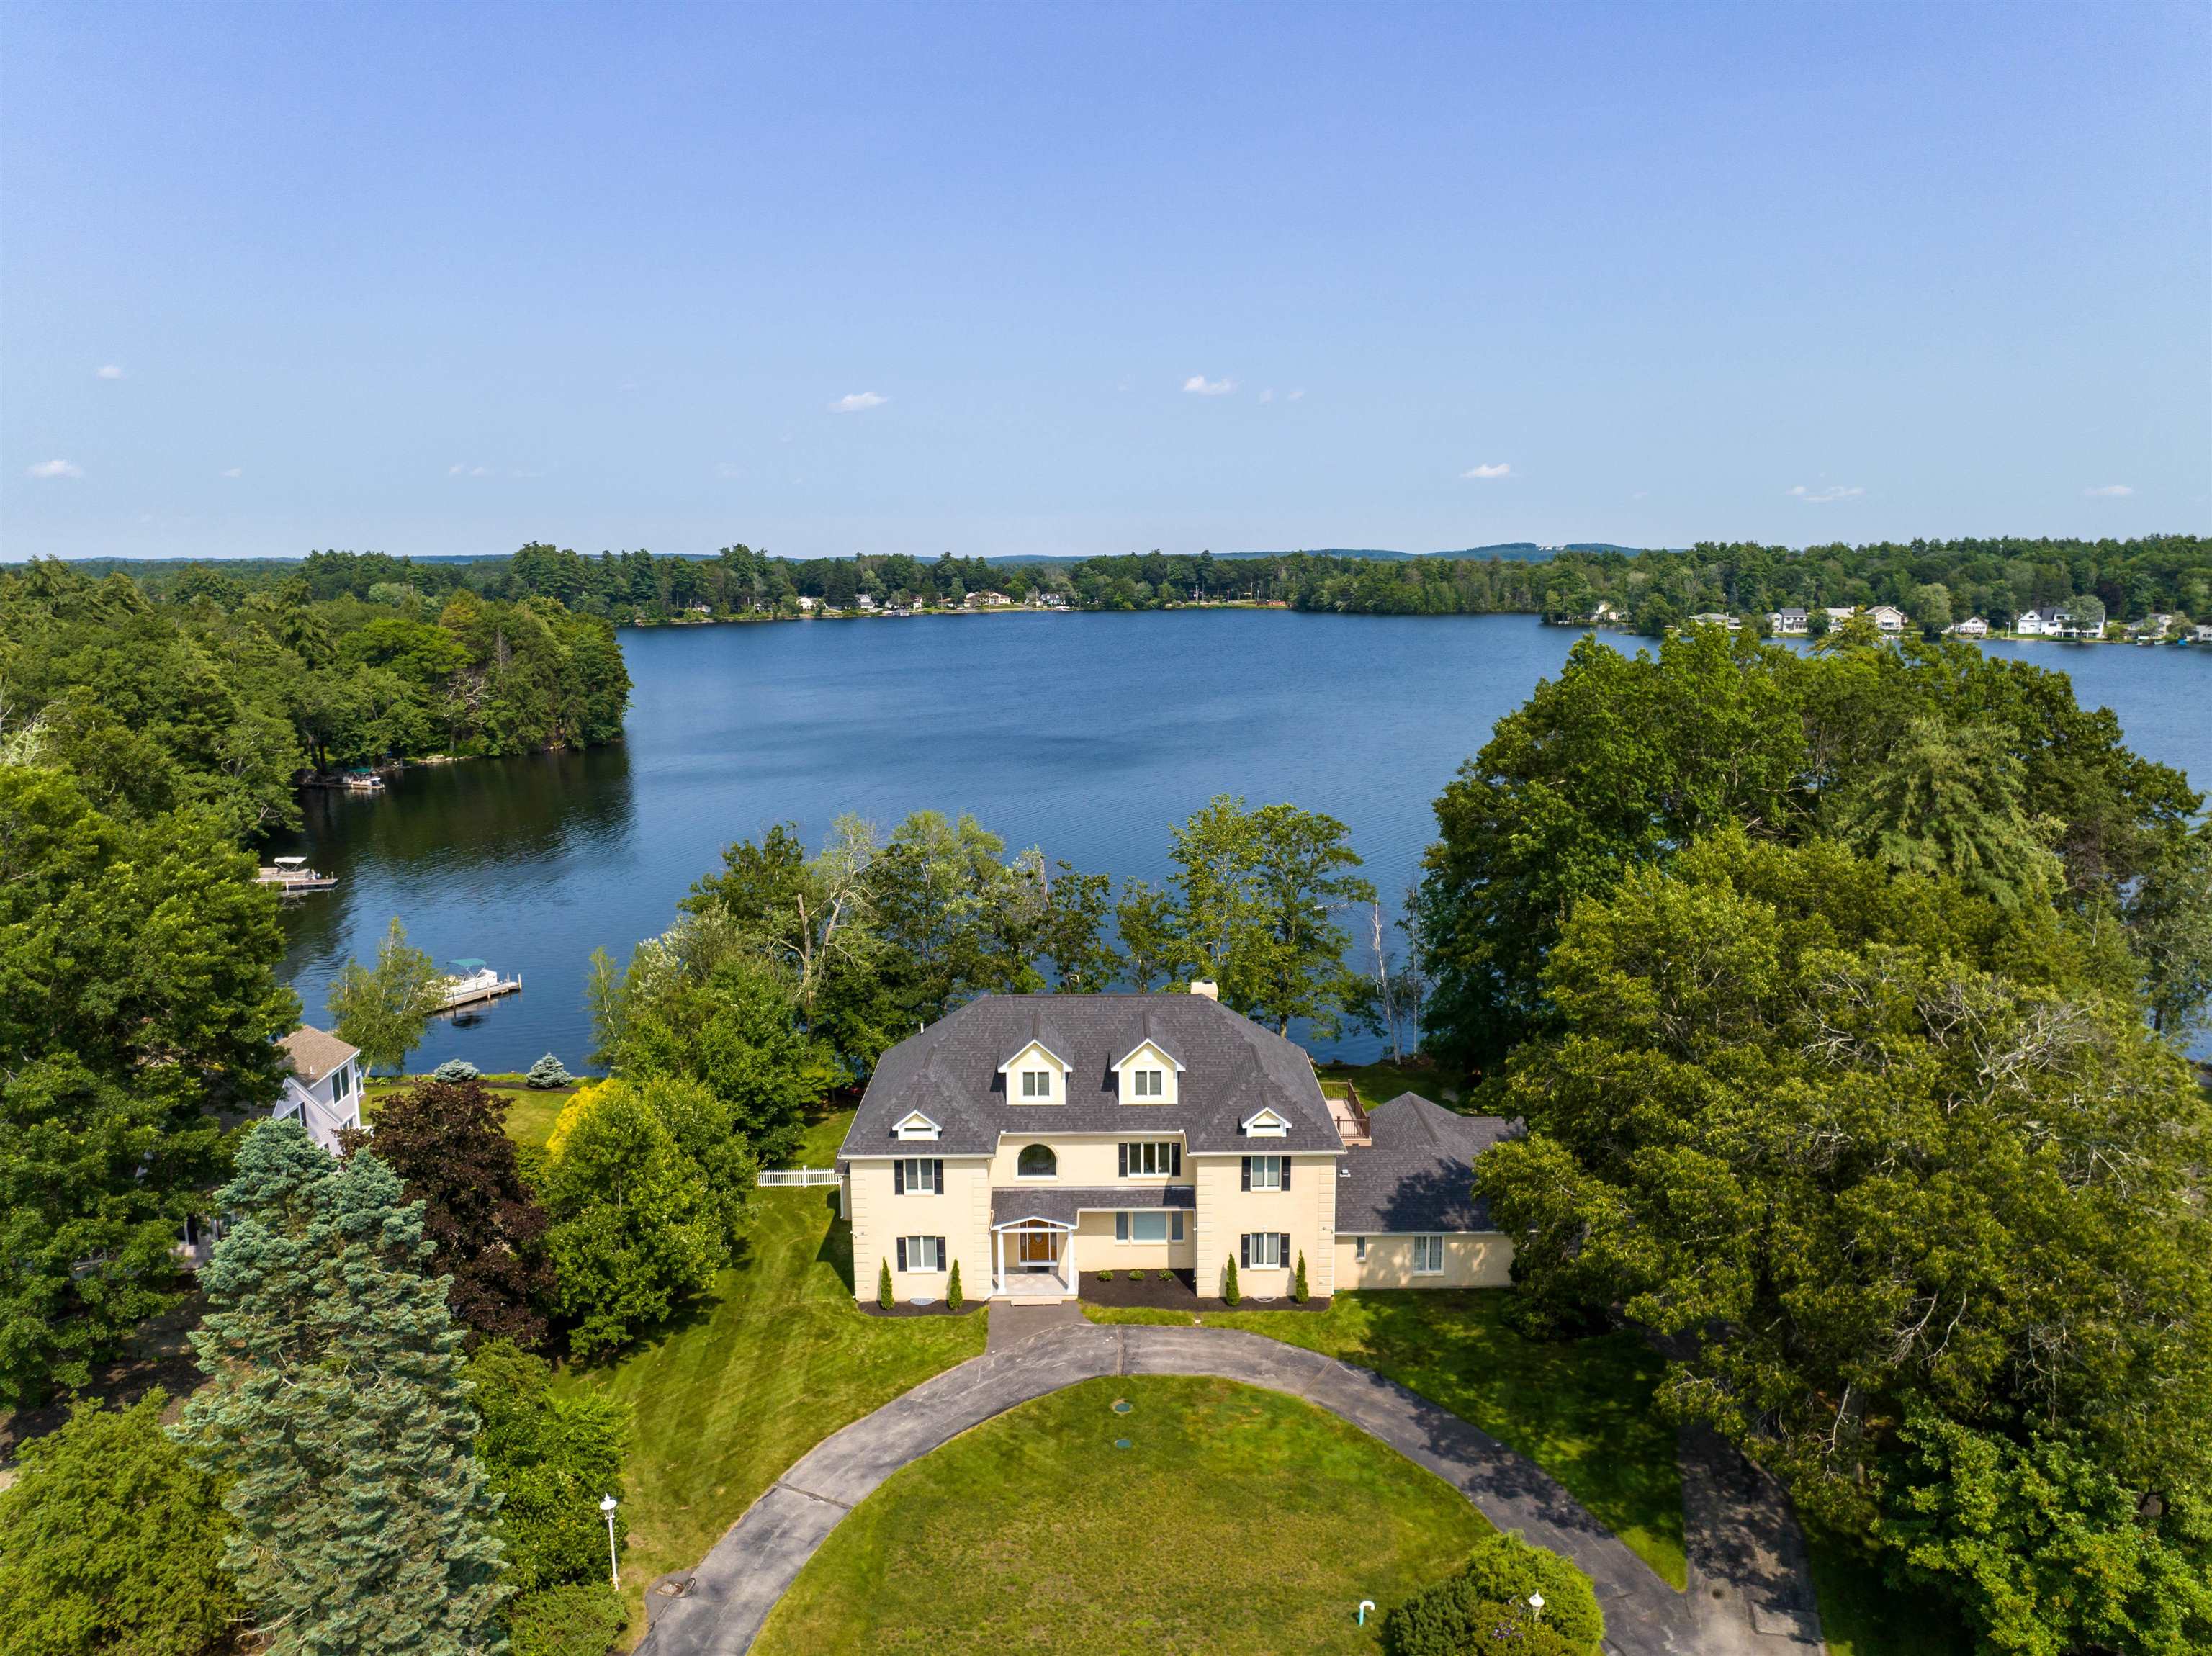 EXPANSIVE WATERFRONT Welcome to the epitome of waterfront luxury on Canobie Lake! This exquisite 5,000+ sq ft residence is a haven of elegance and tranquility, boasting an impressive 215' of pristine water frontage. As you step into the grand foyer, you'll immediately be captivated by the sheer beauty and opulence that define this property. The main floor offers a seamless flow from room to room, featuring an expansive family room adorned with a charming fireplace, formal dining room and well appointed office. Large windows throughout allow for an abundance of light and breathtaking views. You will be inspired by the amazing kitchen equipped with a large center island, state of the art appliances and butler's pantry - every chef's dream kitchen! This home offers two primary suits, one on each floor - to cater to your utmost comfort and privacy. Wake up each morning to the soothing sounds of the lake and breathtaking views from your private balcony or terrace. Two additional en-suite bedrooms, each offering its own private balcony, ensure everyone enjoys a retreat-like experience as well as a second floor loft. A finished third floor offers endless possibilities. With an impeccable design, breathtaking views, and lavish amenities, this home is sure to surpass all your expectations. Close to shopping, dining and minutes to Rte 93! Showings begin Saturday 7/22 at open house